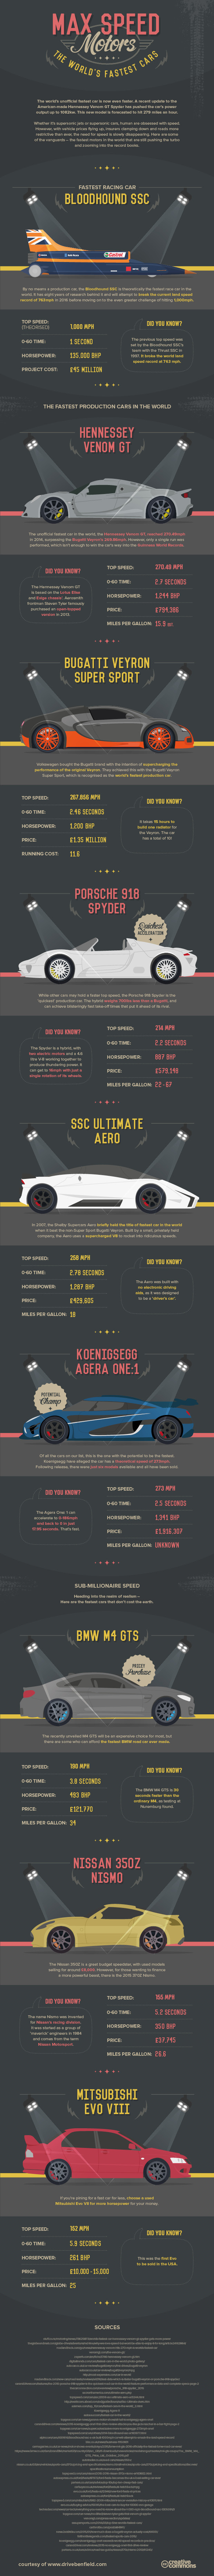 infographic - Benfield Motors - the worlds fastest cars